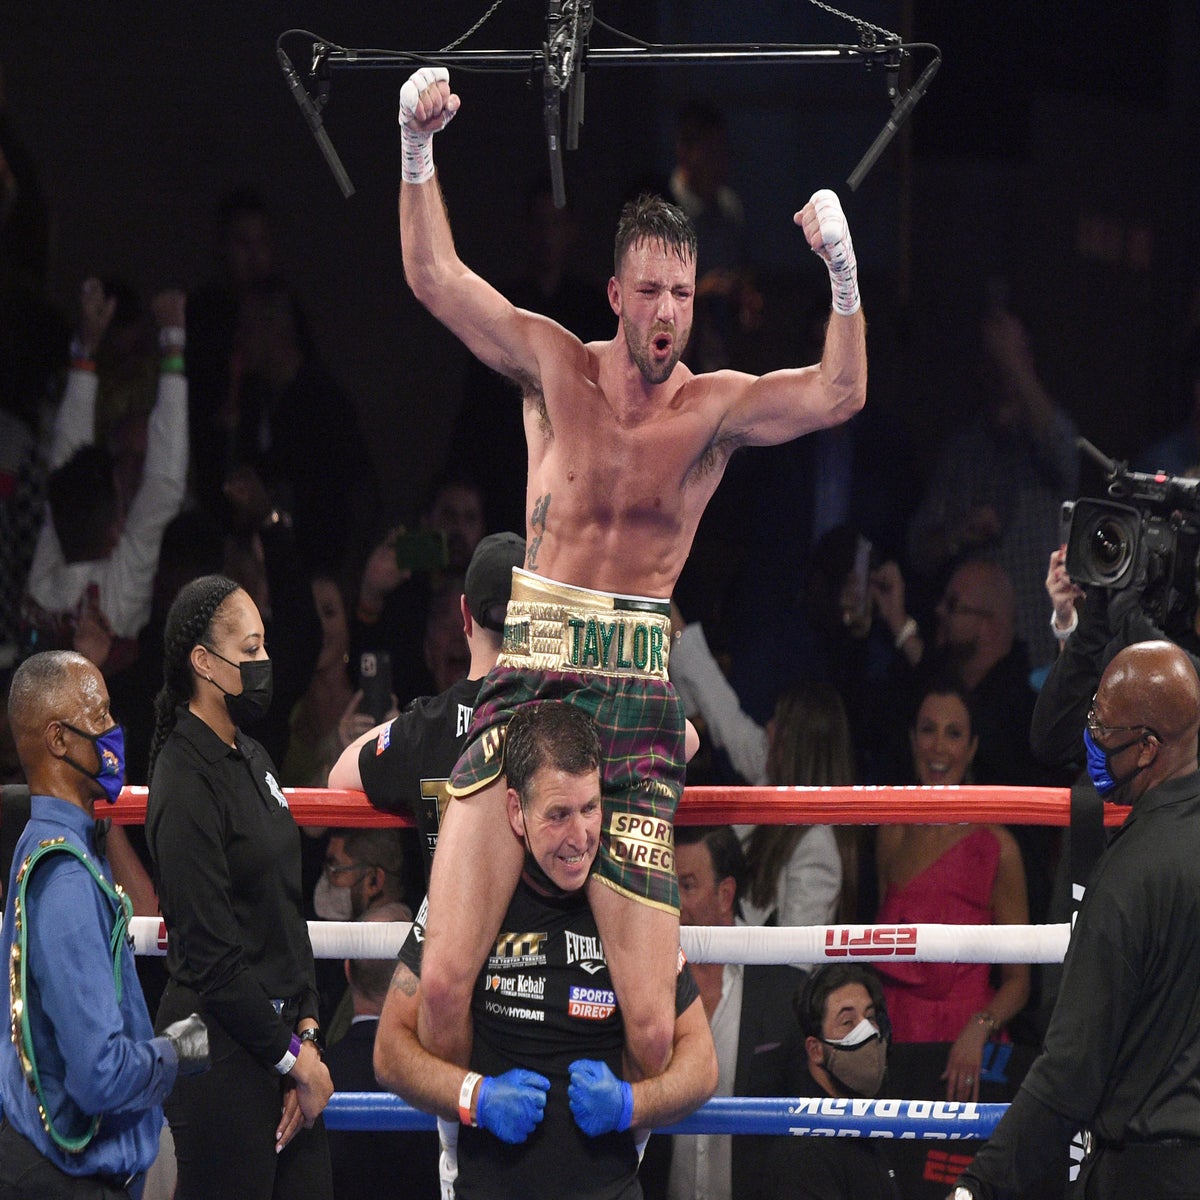 Classy Josh Taylor unifies light welterweight division with